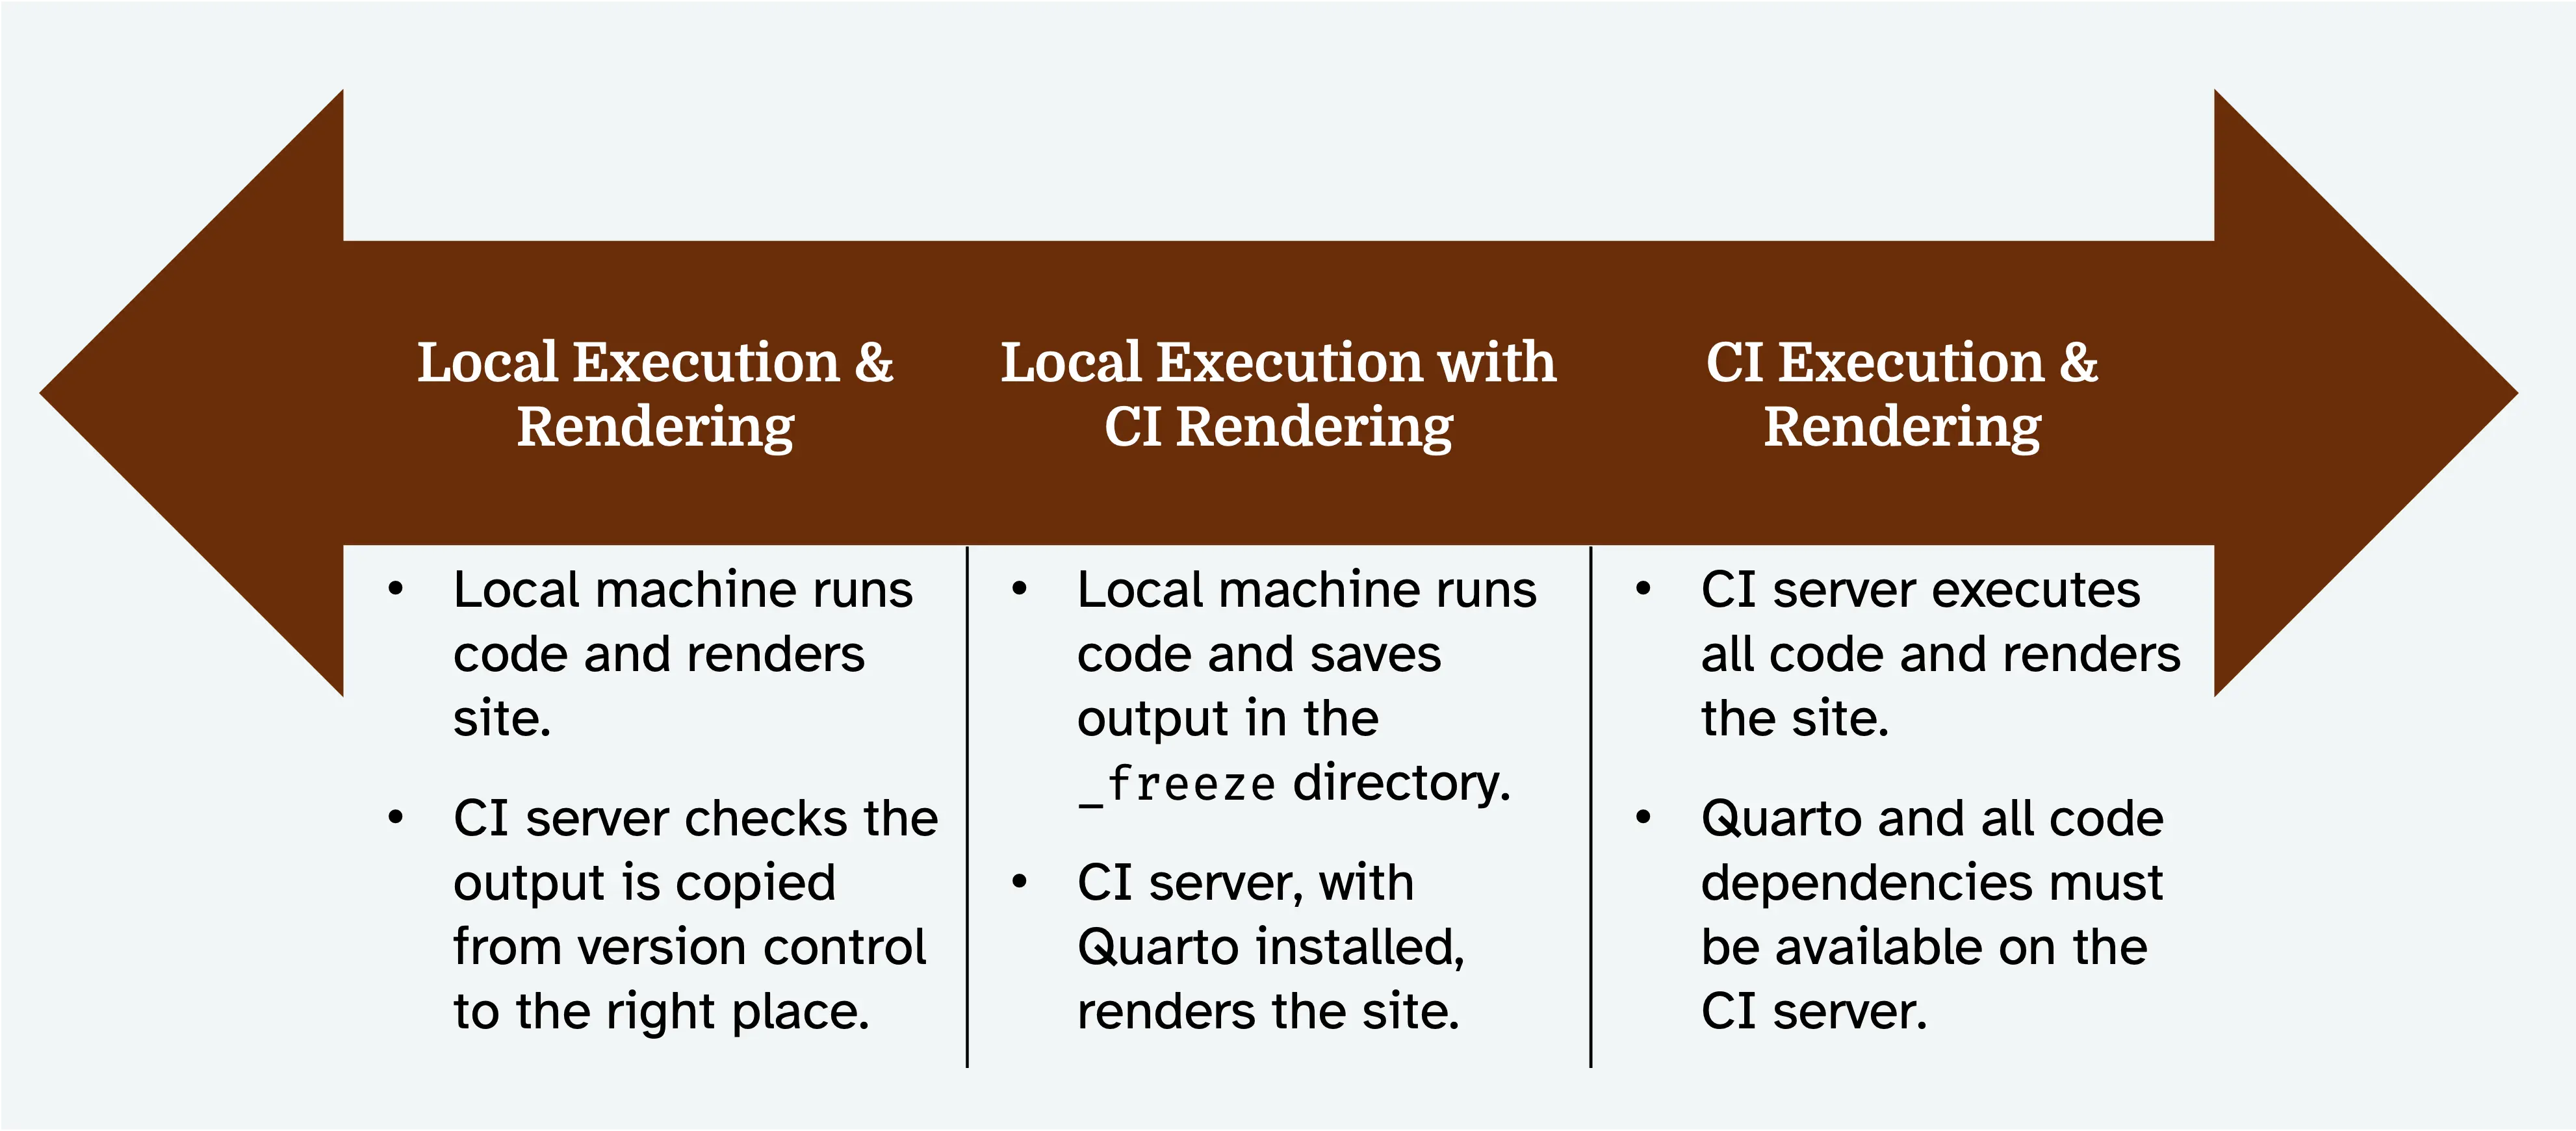 Graphic of continuous integration continuum with double sided arrow. On the very left is Local Execution & Rendering where the local machine runs code and renders the site and the C server checks the output is copied from version control to the right place. In the middle is Local Execution with CI Rendering where local machine runs code and saves output in the _freeze directory and the CI server with Quarto installed renders the site. The right is CI Execution and Rendering where the CI server executes all code and renders the site; Quarto and all code dependencies must be available on the CI server.